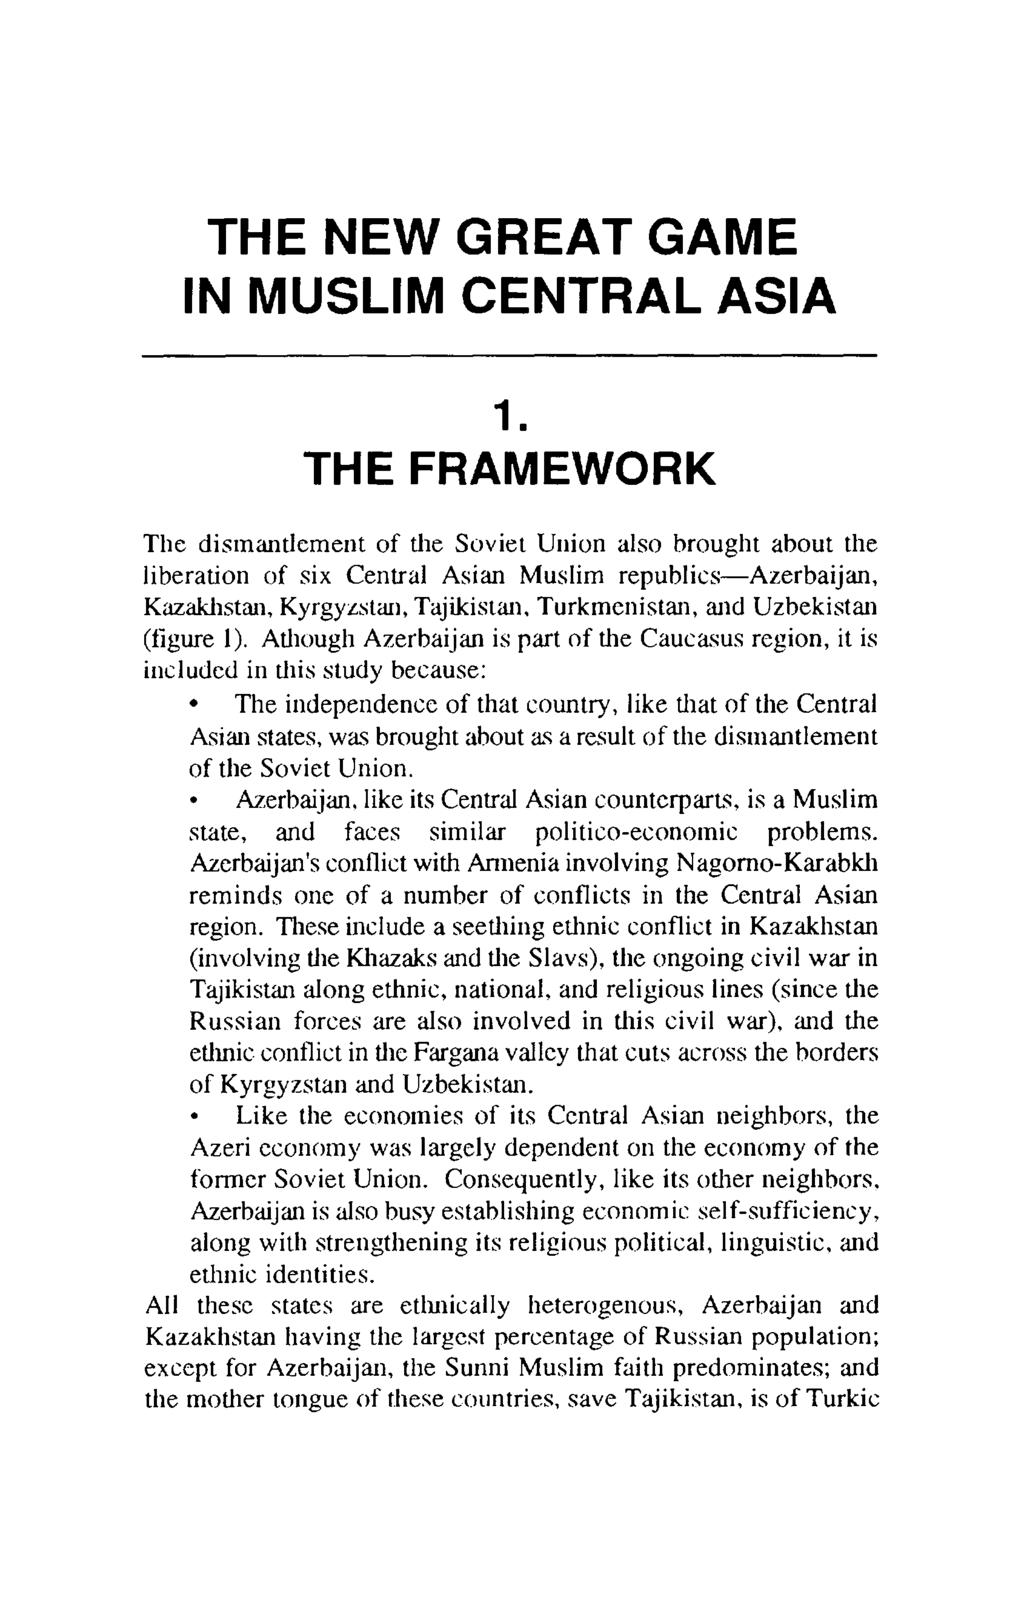 THE NEW GREAT GAME IN MUSLIM CENTRAL ASIA 1.